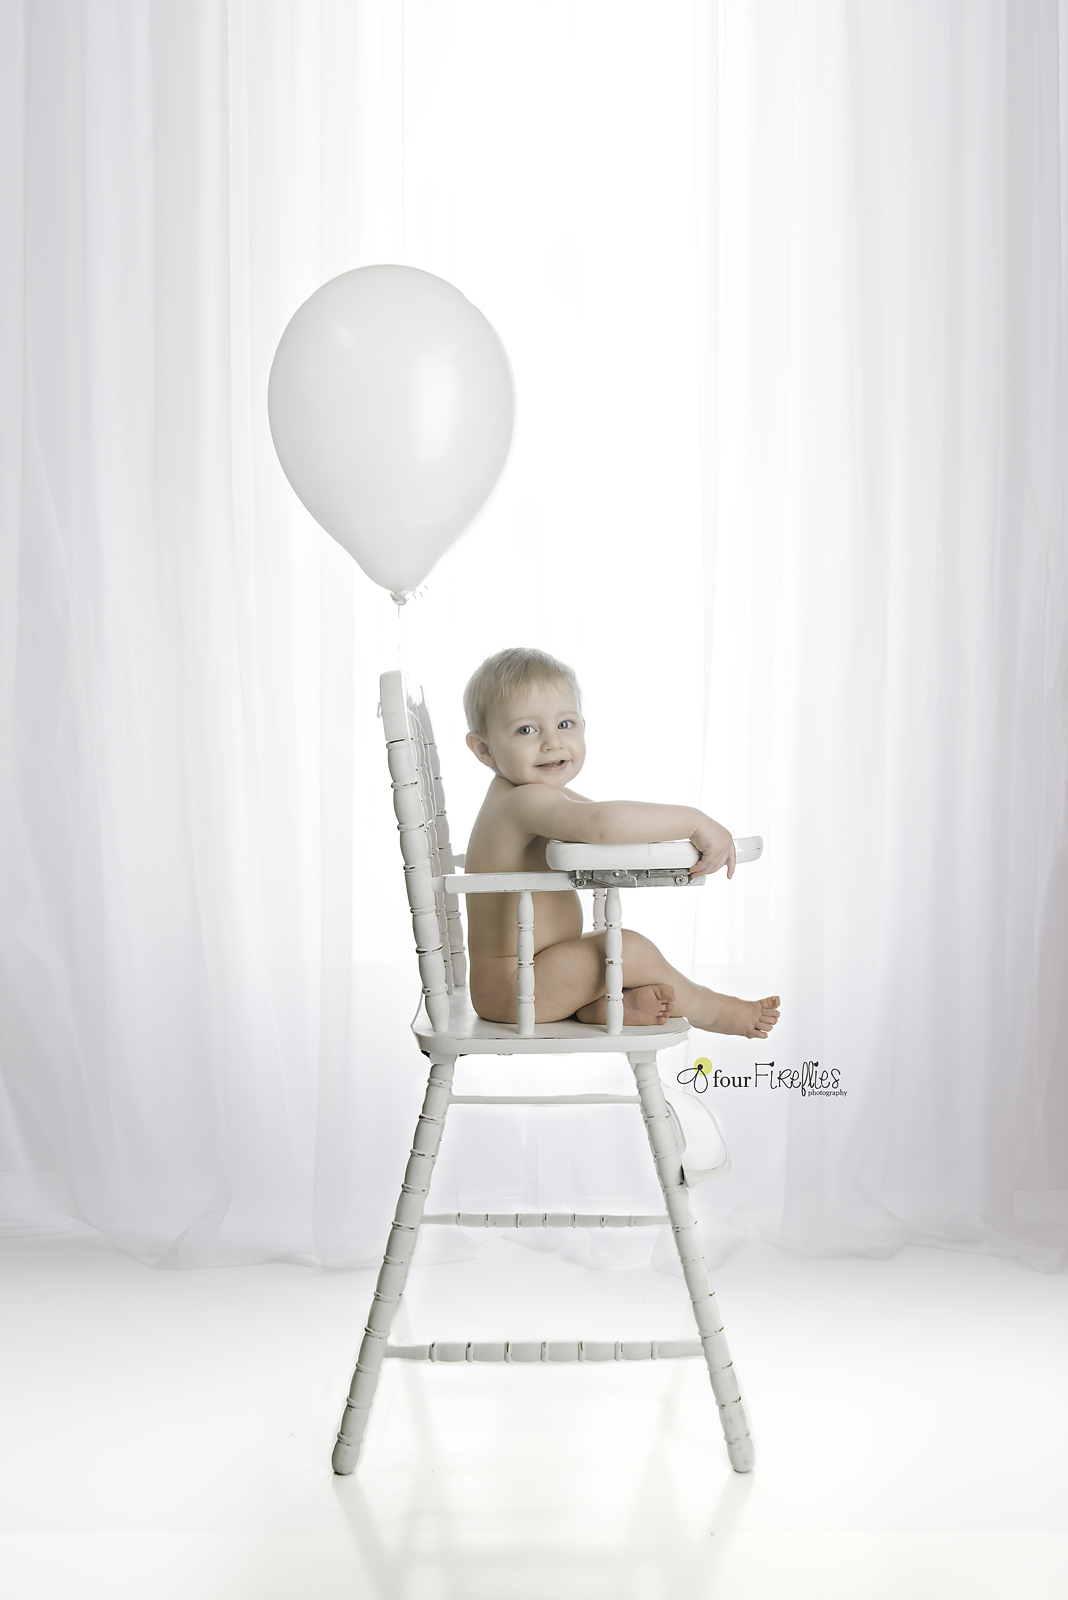 st-louis-photography-studio-first-birthday-baby-boy-in-high-chair-with-balloon-all-white-simple.jpg